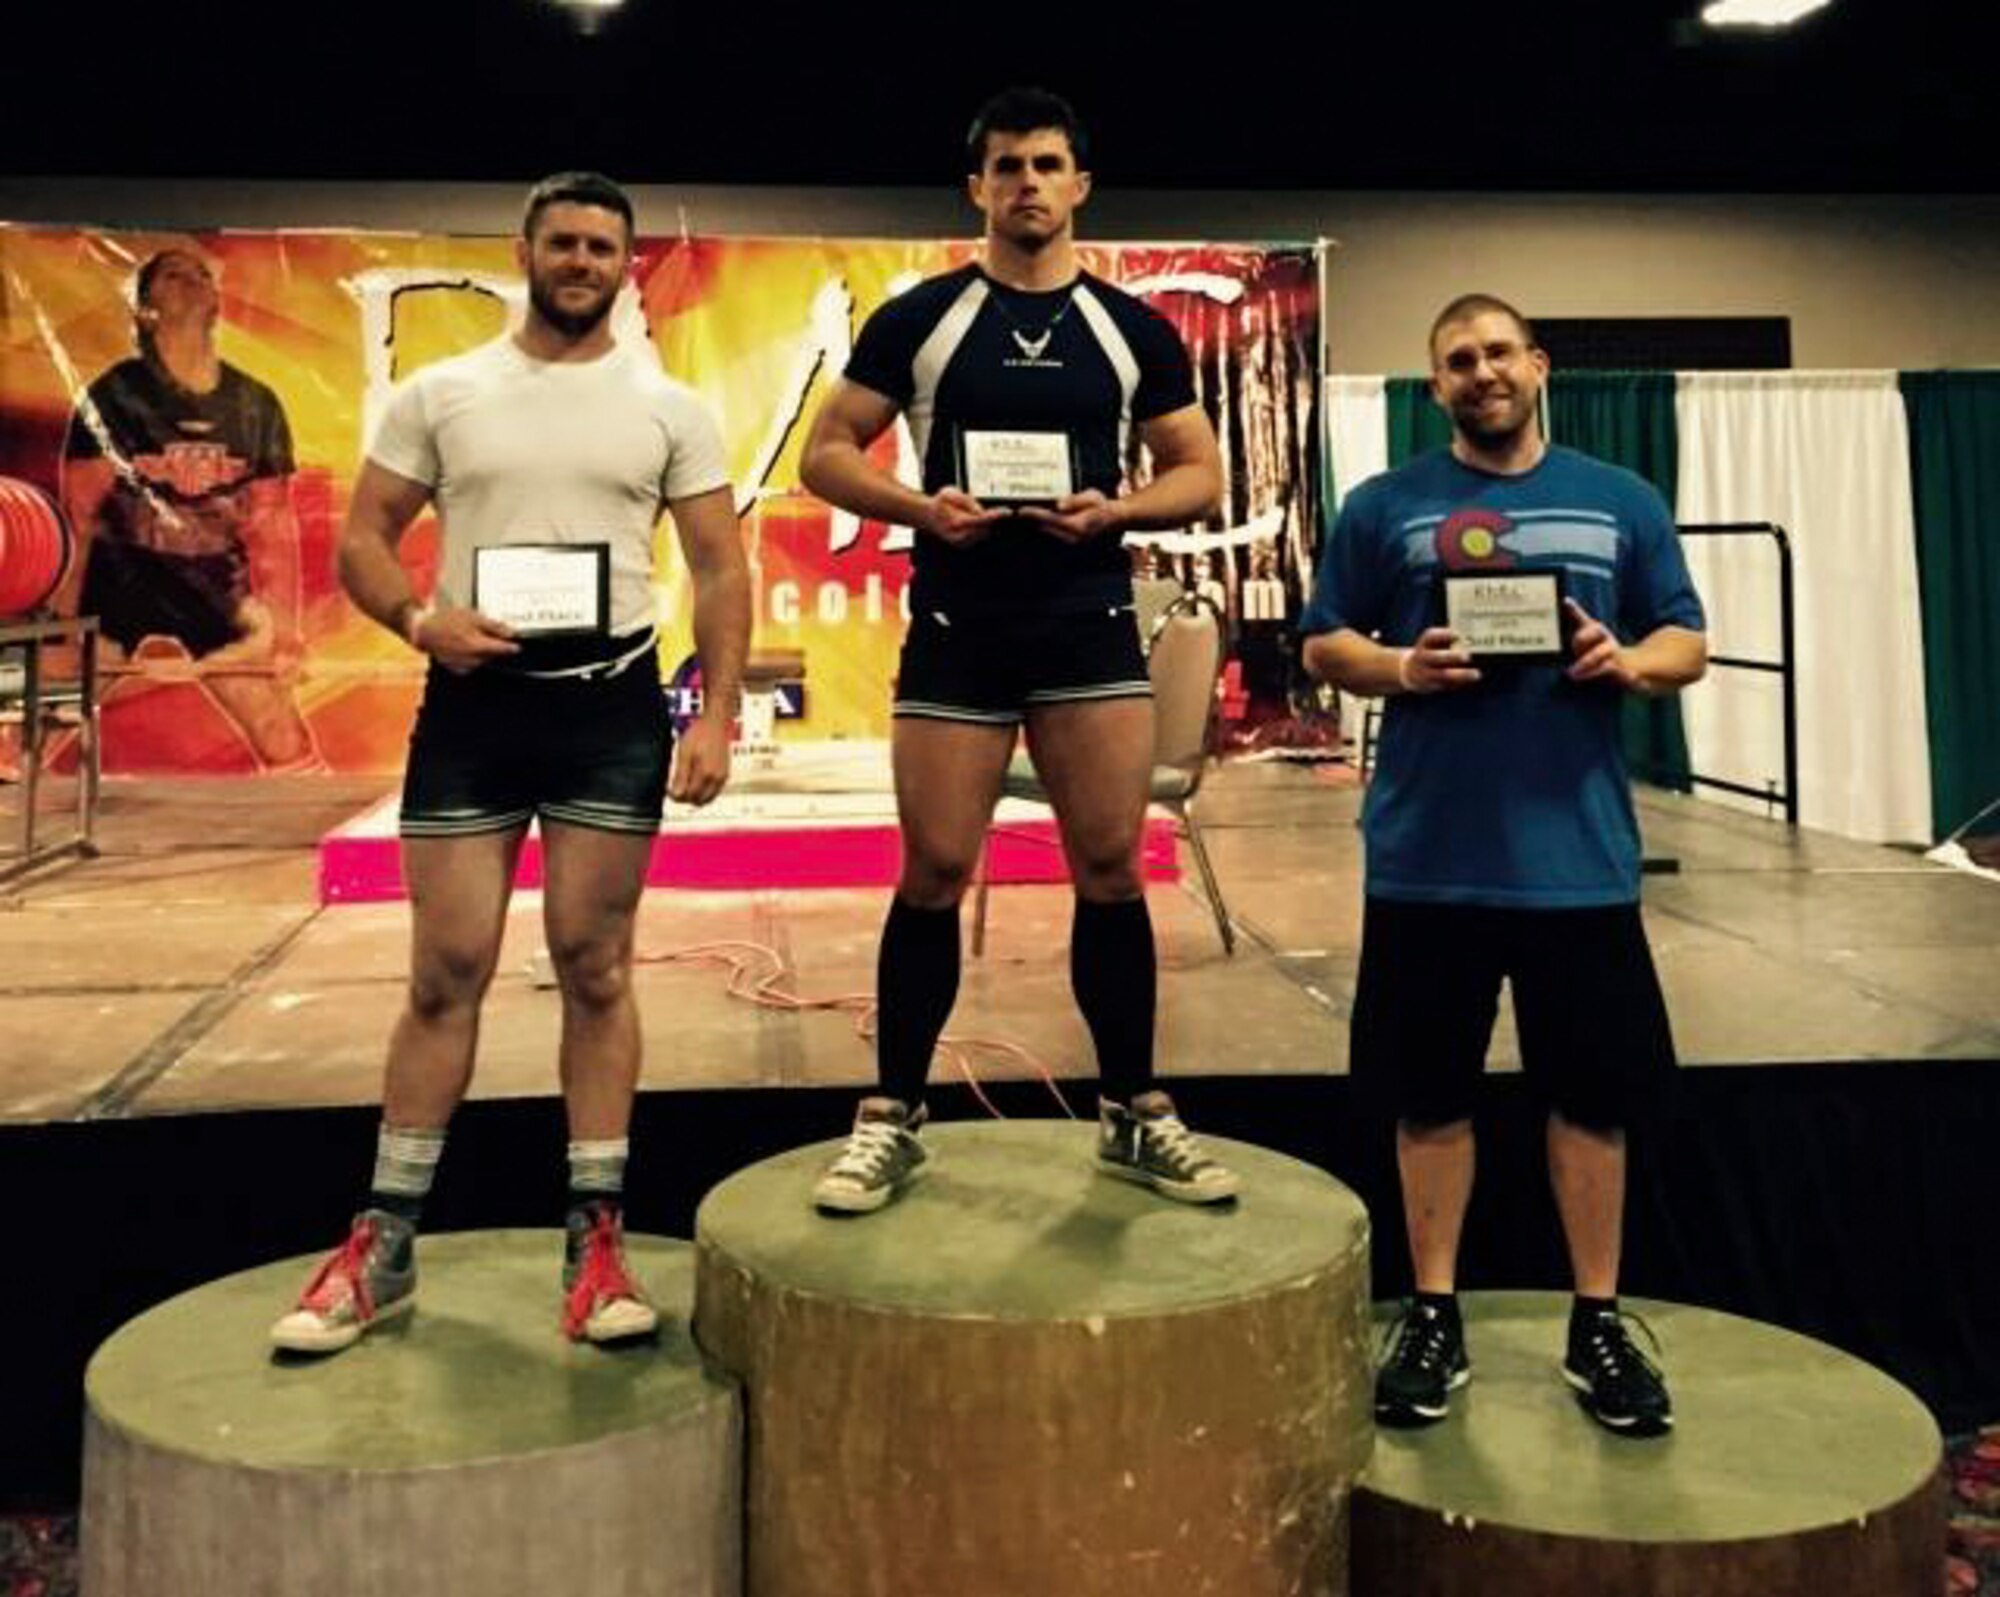 Senior Airman Jacob Horton, 460th Contracting Flight, wins first place at his first ever powerlifting competition in February 2015 in Colorado. He began powerlifting while on deployment and has been competing successfully since then. (Courtesy Photo)